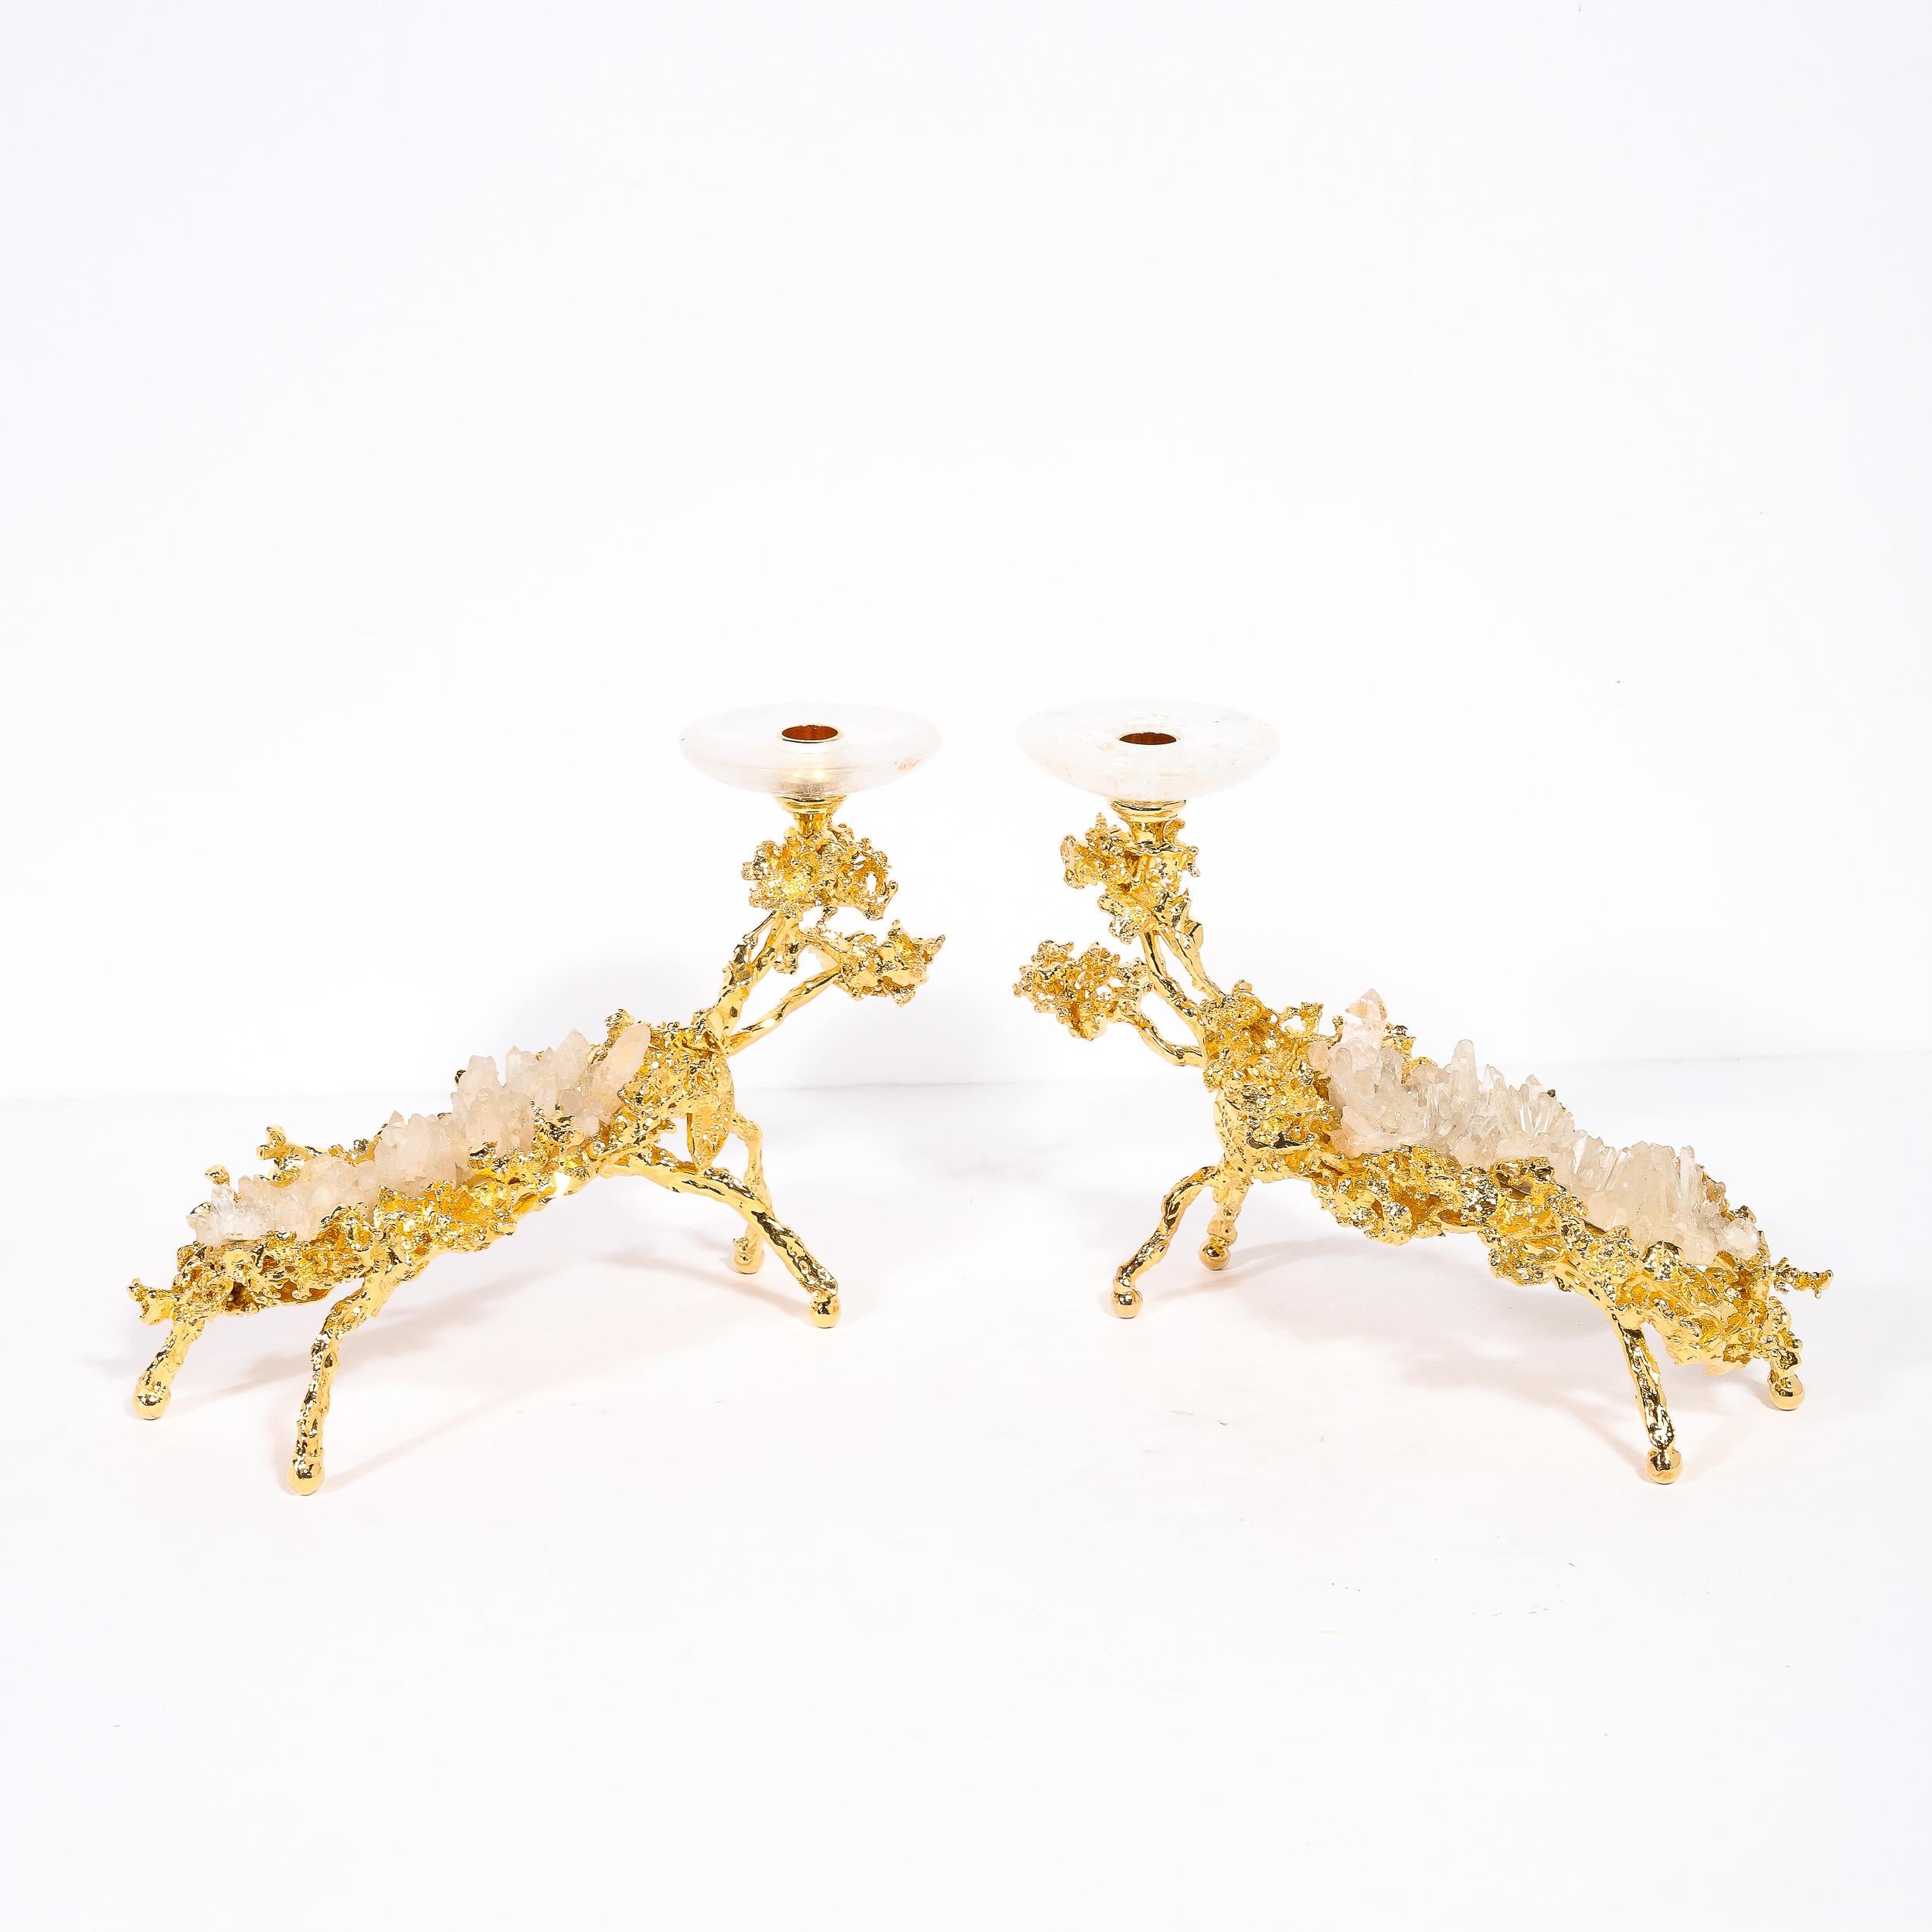 Pair of 24Karat Gold Low Branch Candleholders w/ Rock Crystals by Claude Boeltz For Sale 2